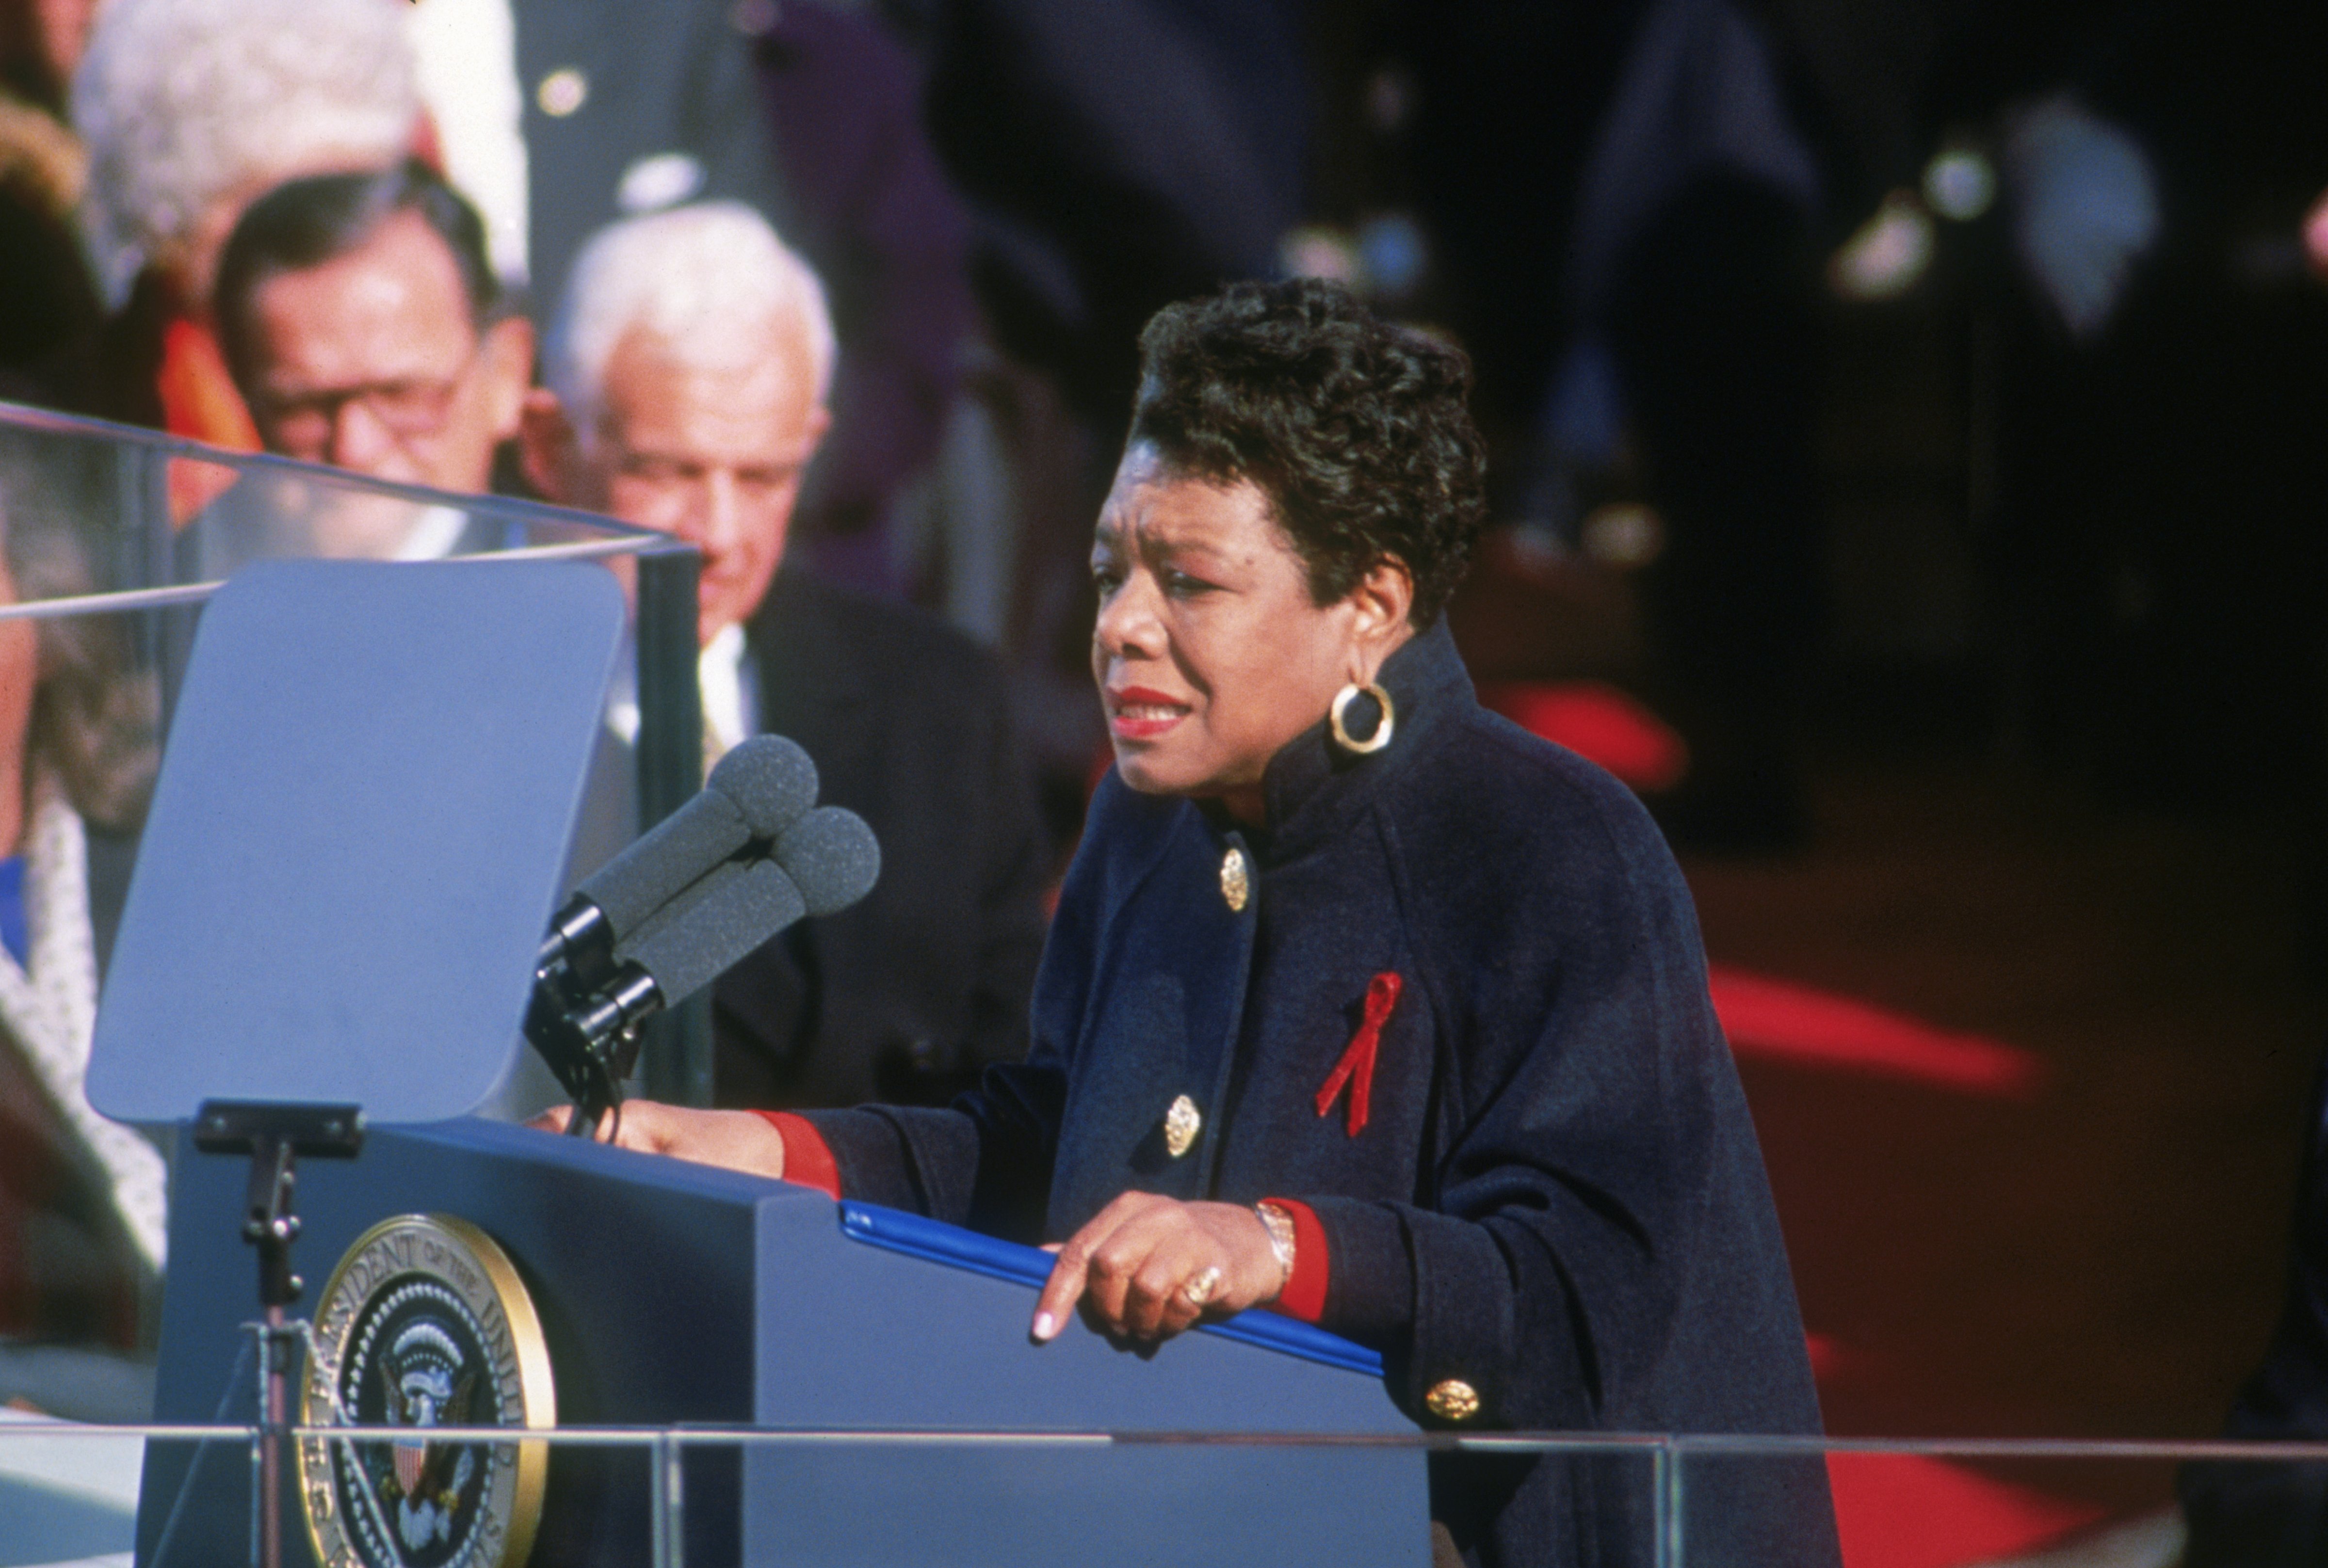 American poet Maya Angelou reciting her poem 'On the Pulse of Morning' at the inauguration of President Bill Clinton in Washington DC, 20th January 1993. (Photo by Consolidated News Pictures/Hulton Archive/Getty Images) ((Consolidated News Pictures; Getty Images))